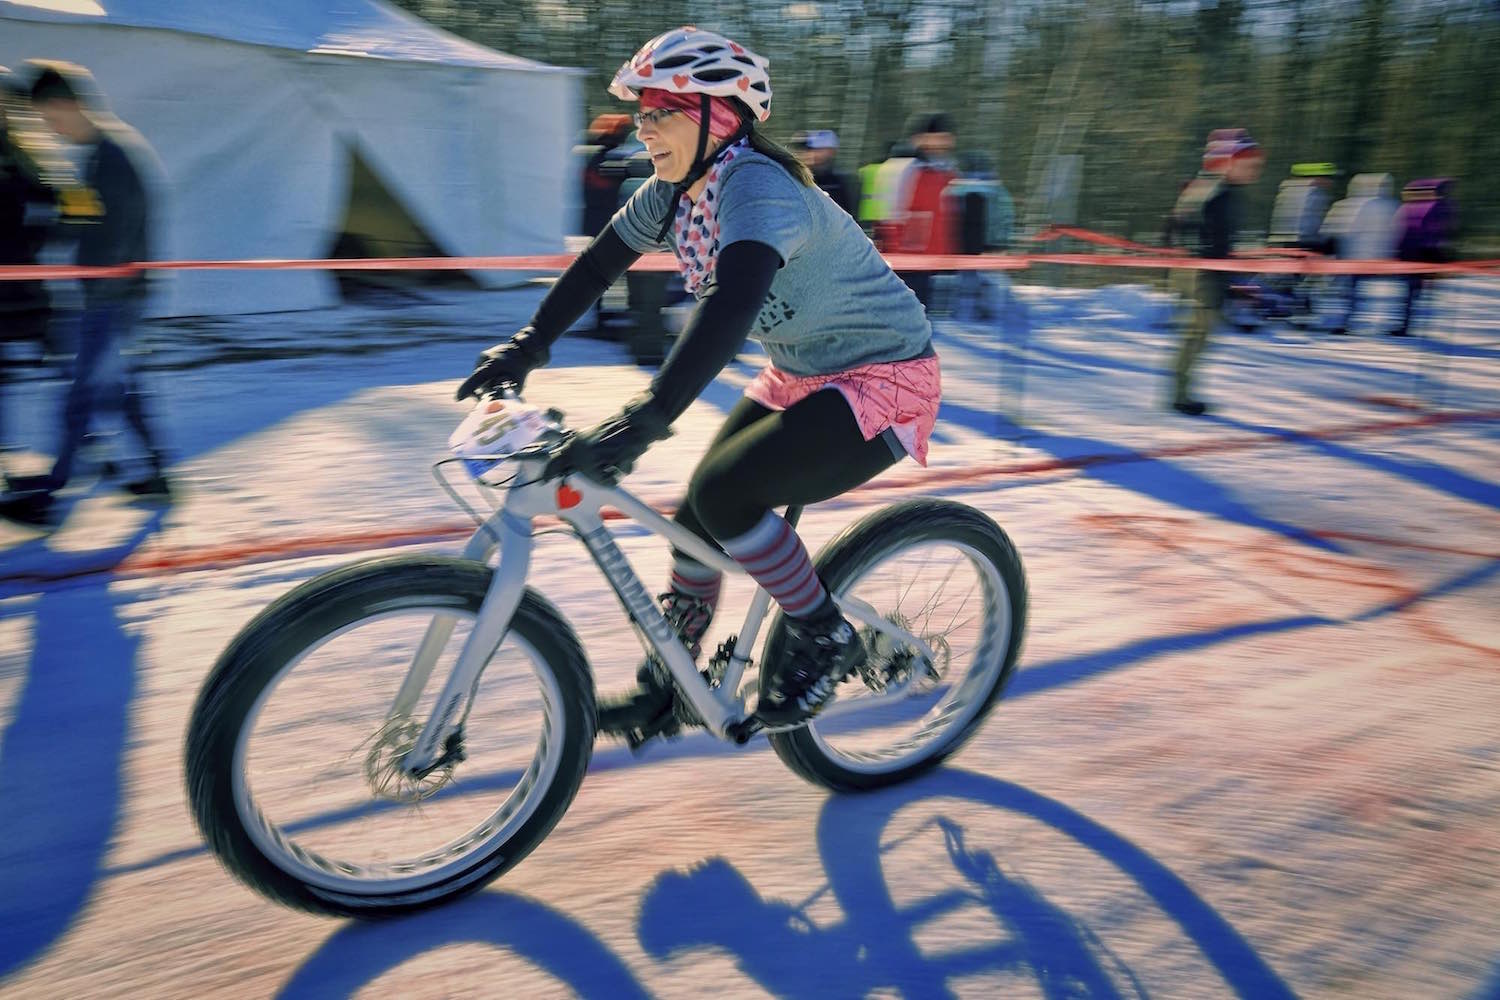 A race competitor celebrates Valentine's day while speeding down the course on her fat bike.